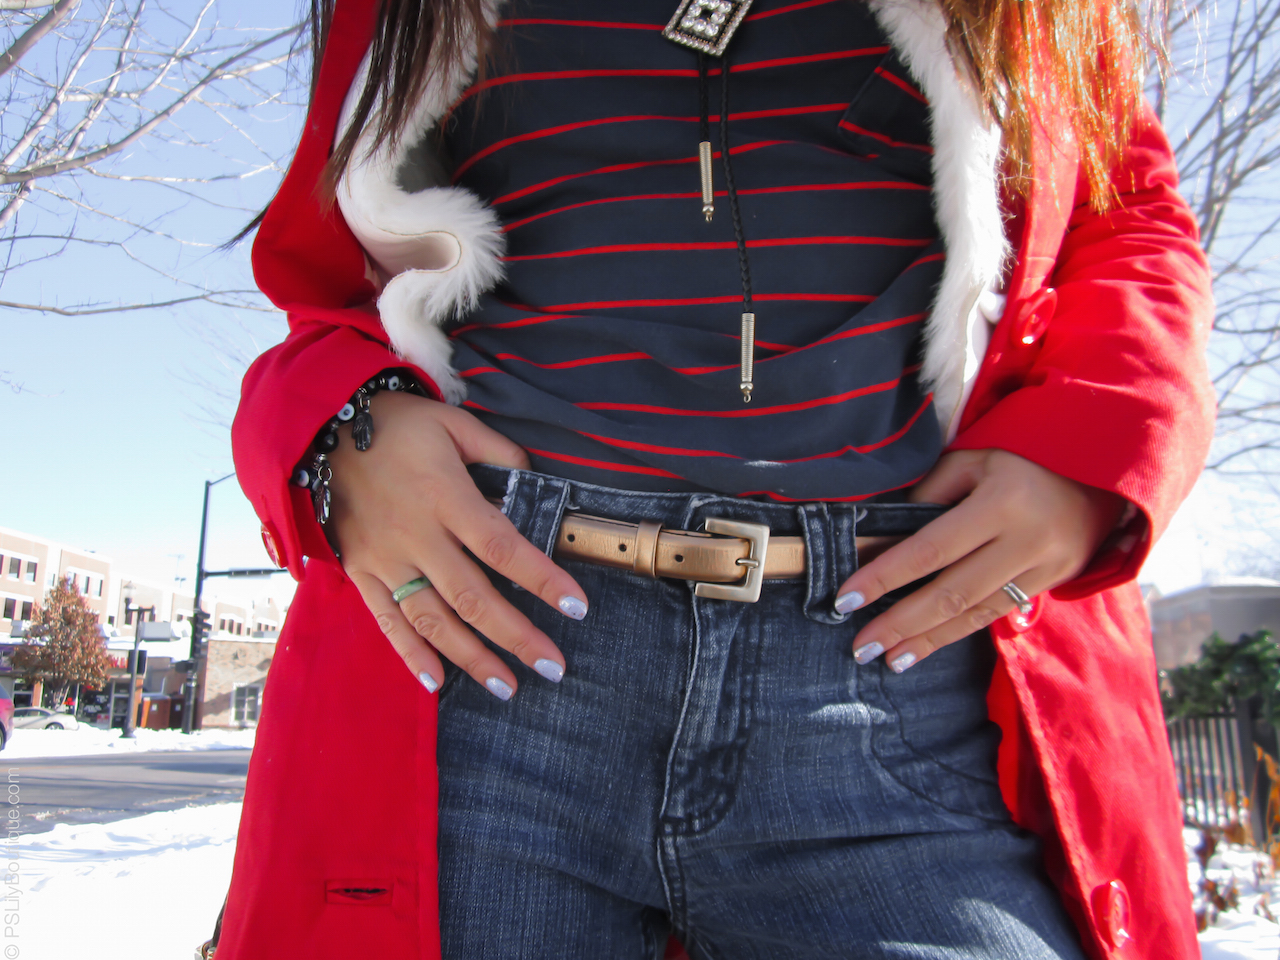 instagram-pslilyboutique-los-angeles-fashion-blogger-blog-gold-american-eagle-outfitters-skinny-belt-kokie-cosmetics-nail-polish-red-stripe-shirt-h&m-red-coat-winter-2016-outfits-12-26-16